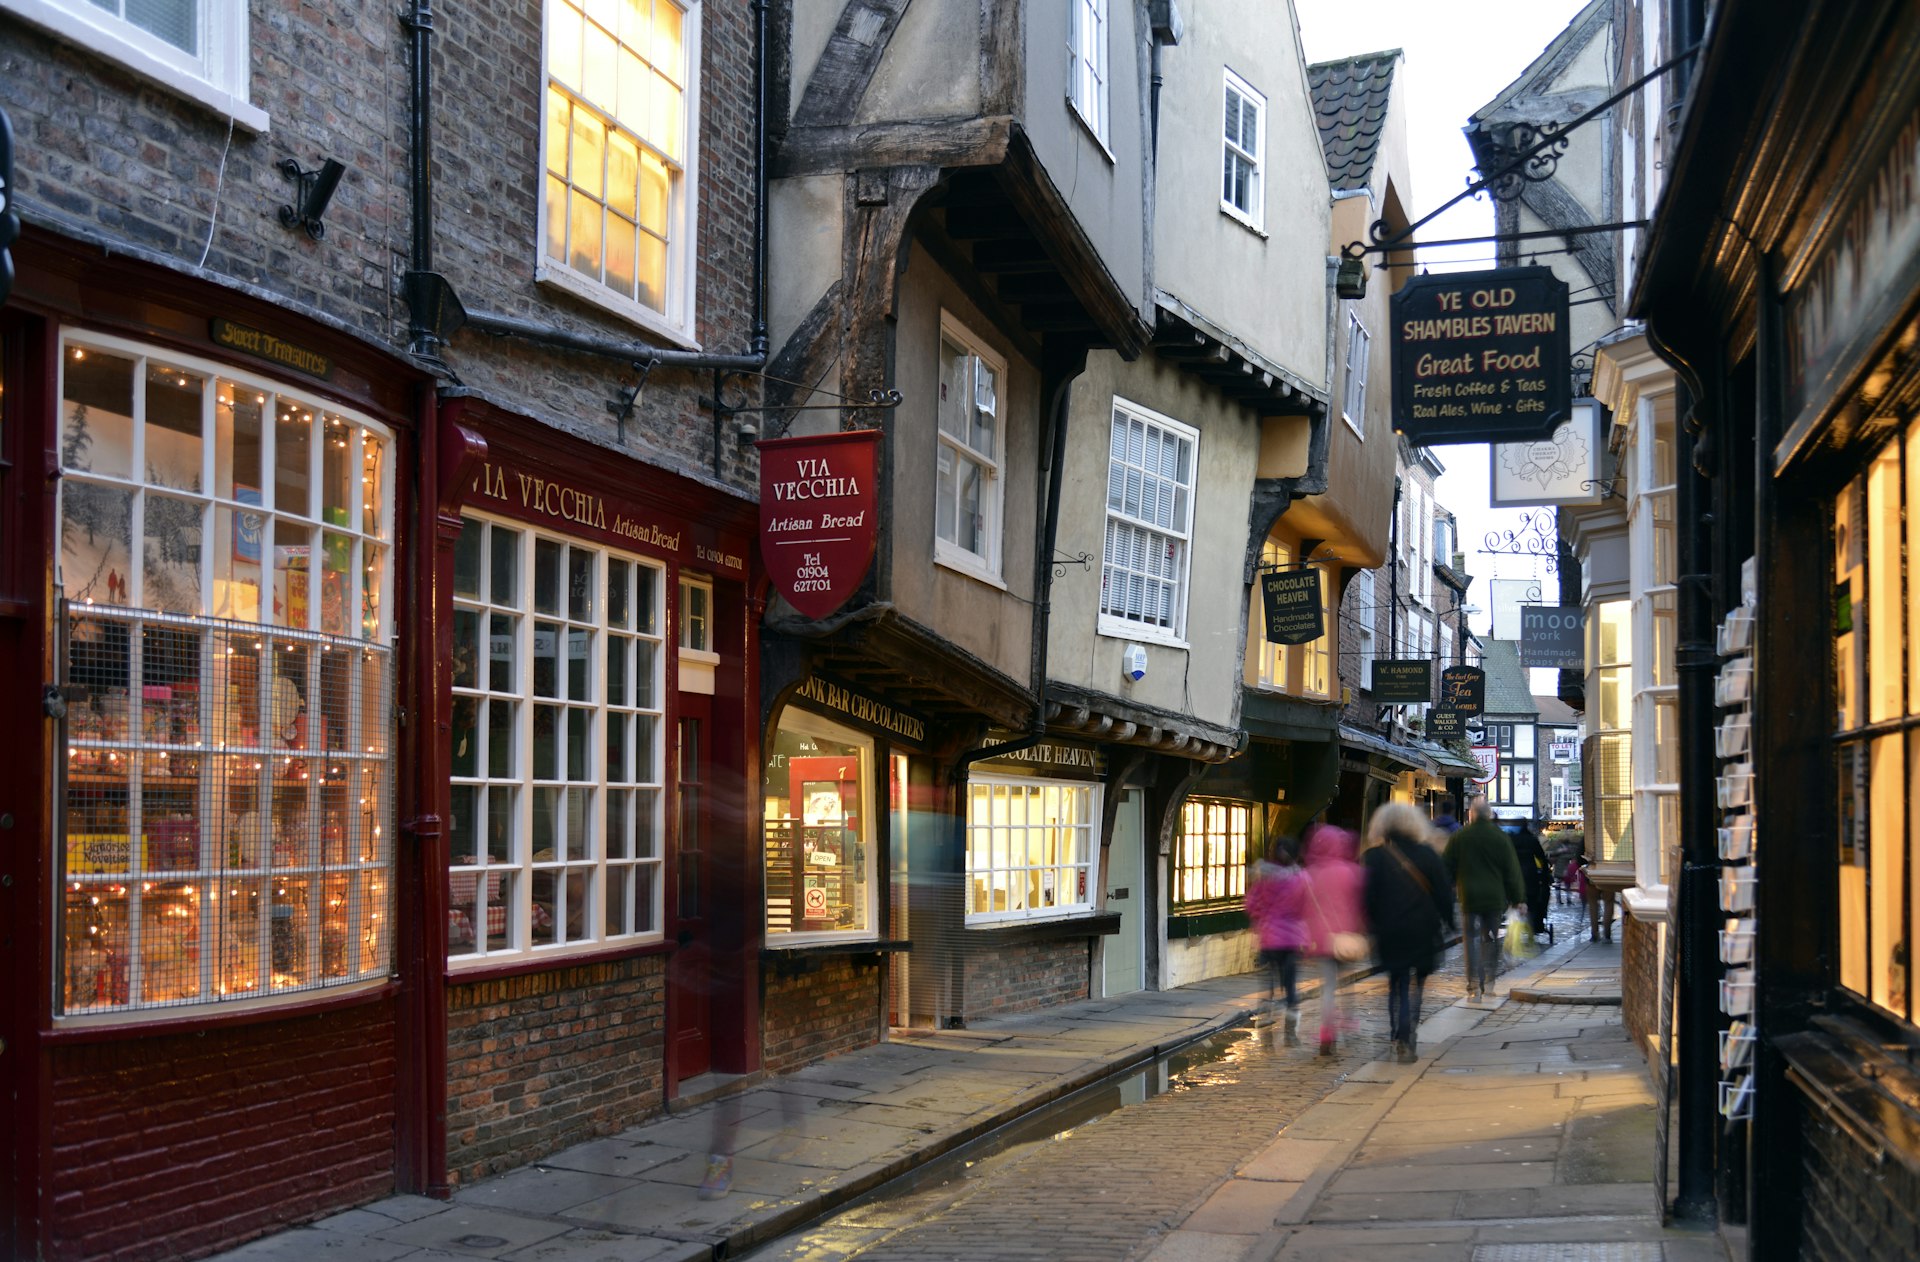 People walk in the evening on the Shambles, York, Yorkshire, England, United Kingdom